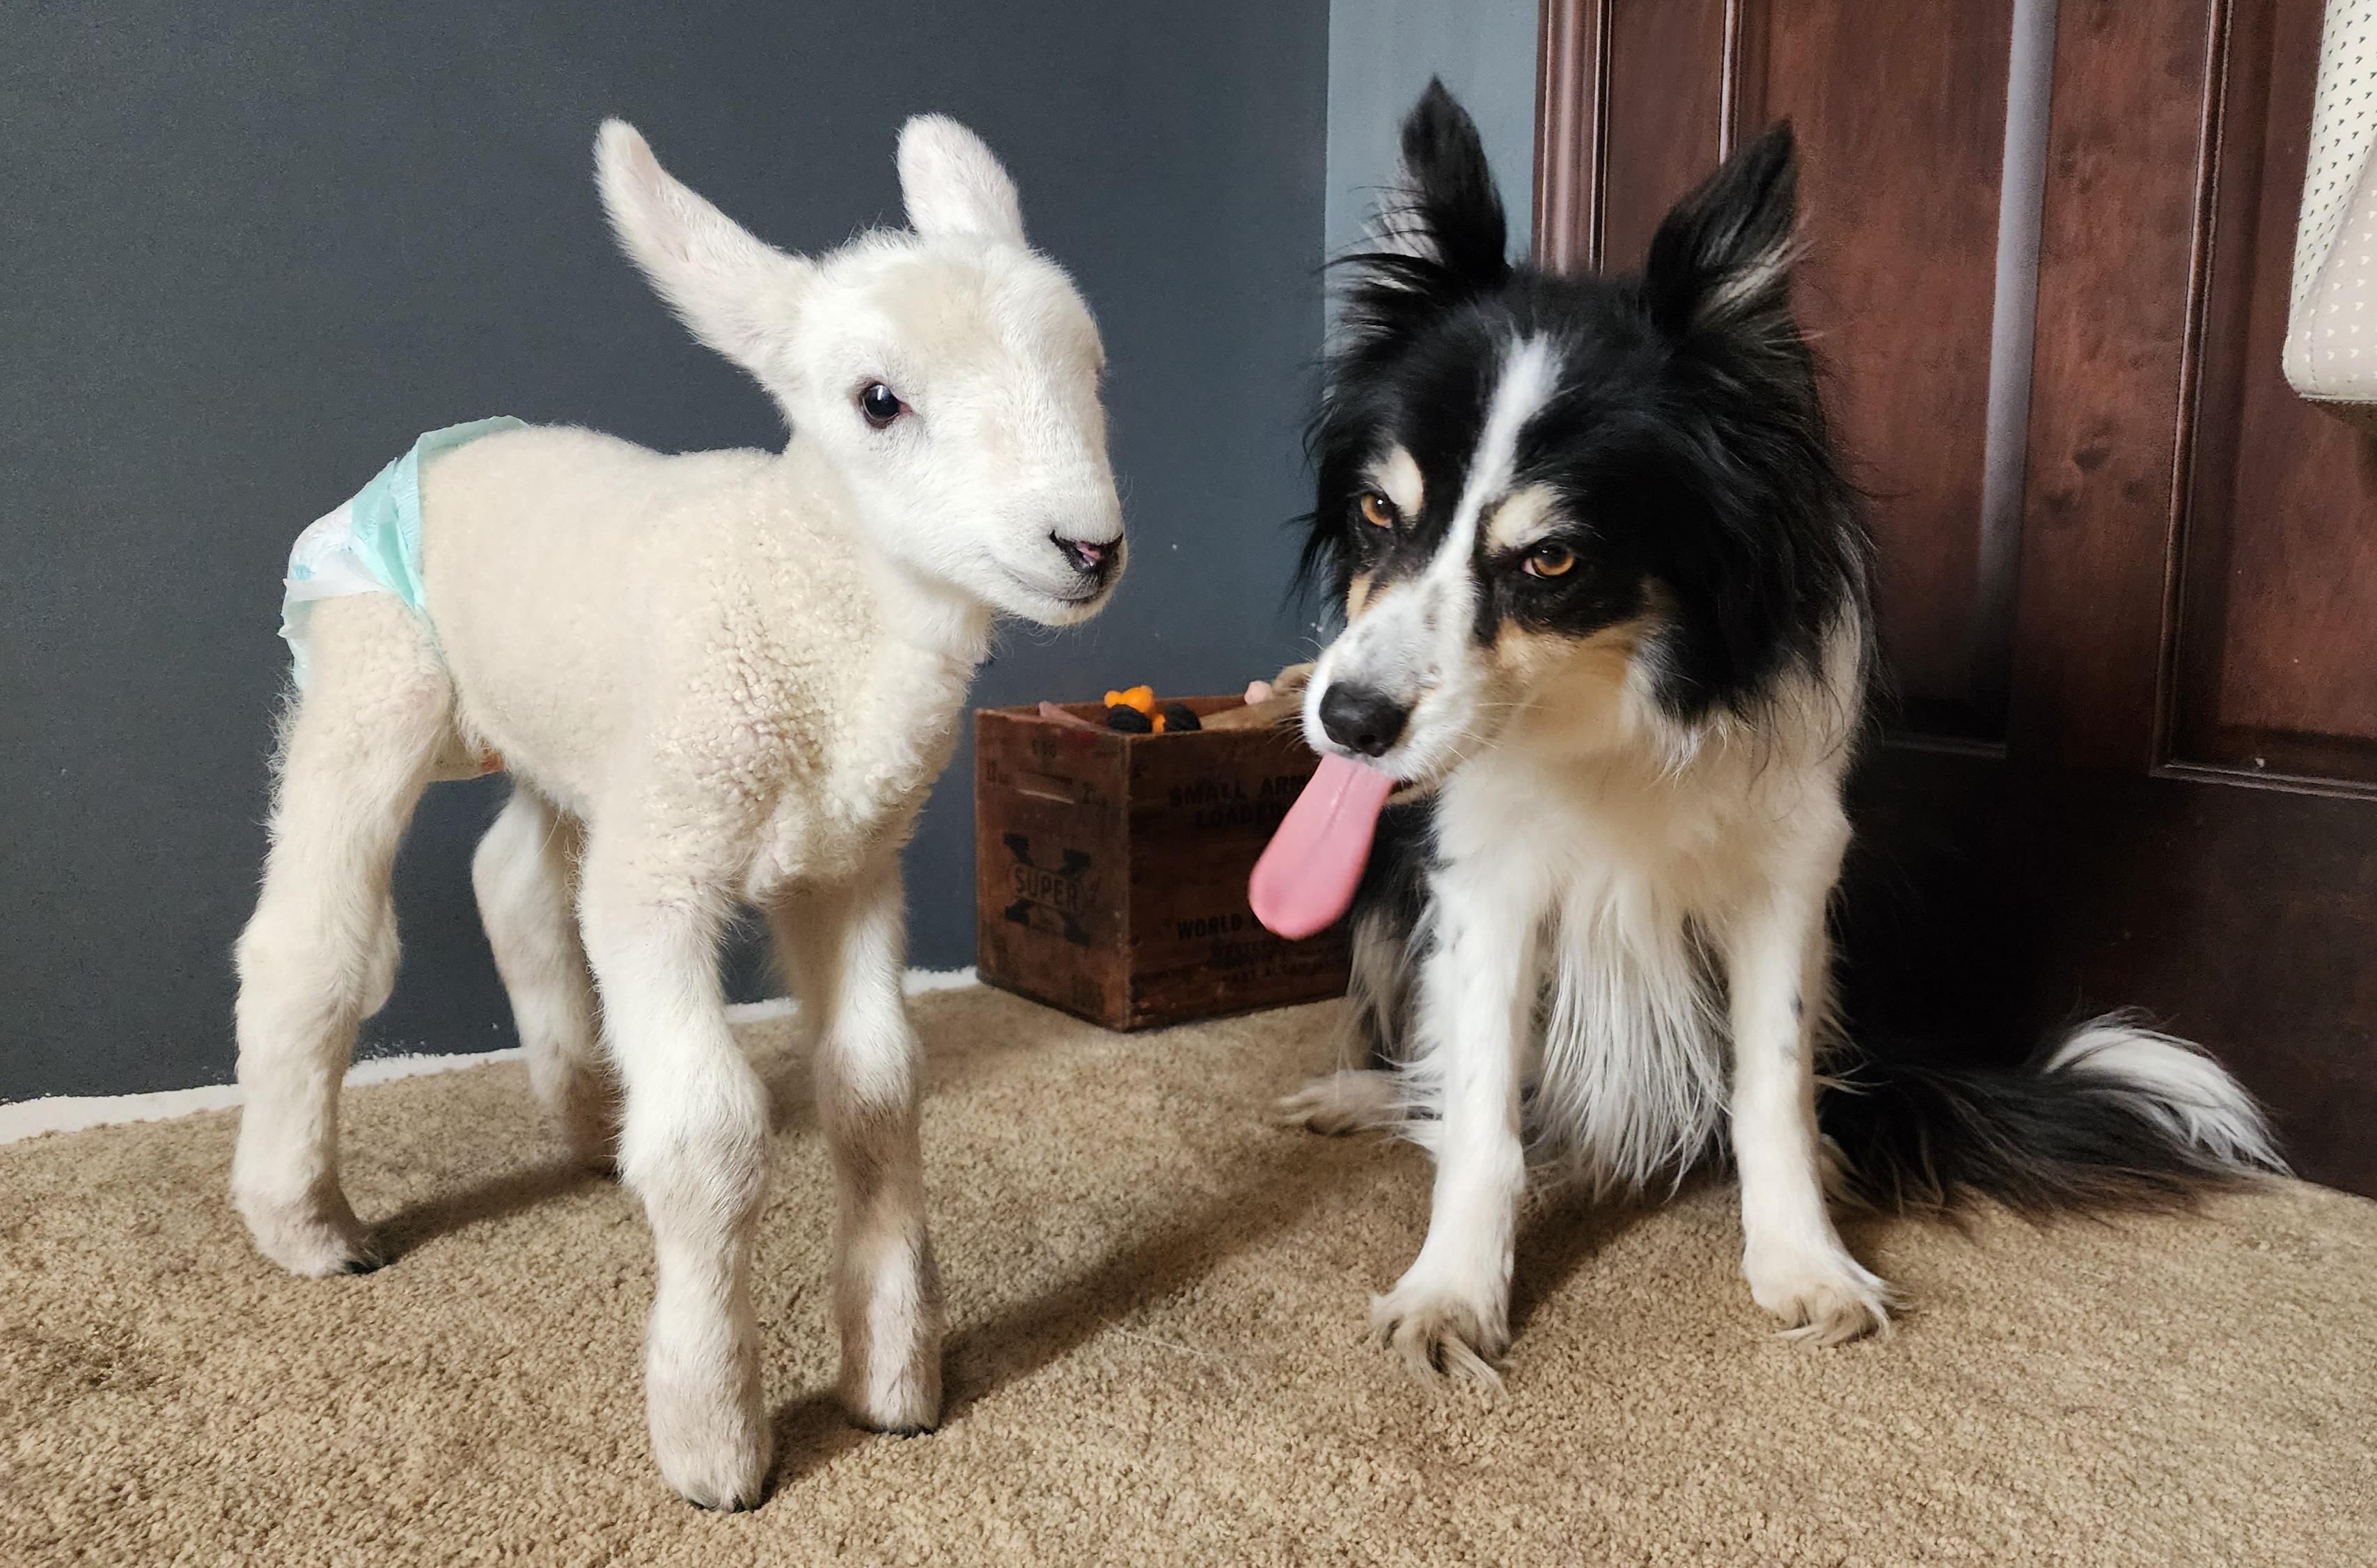 My sheepdog isn't so sure about the sheep in the house